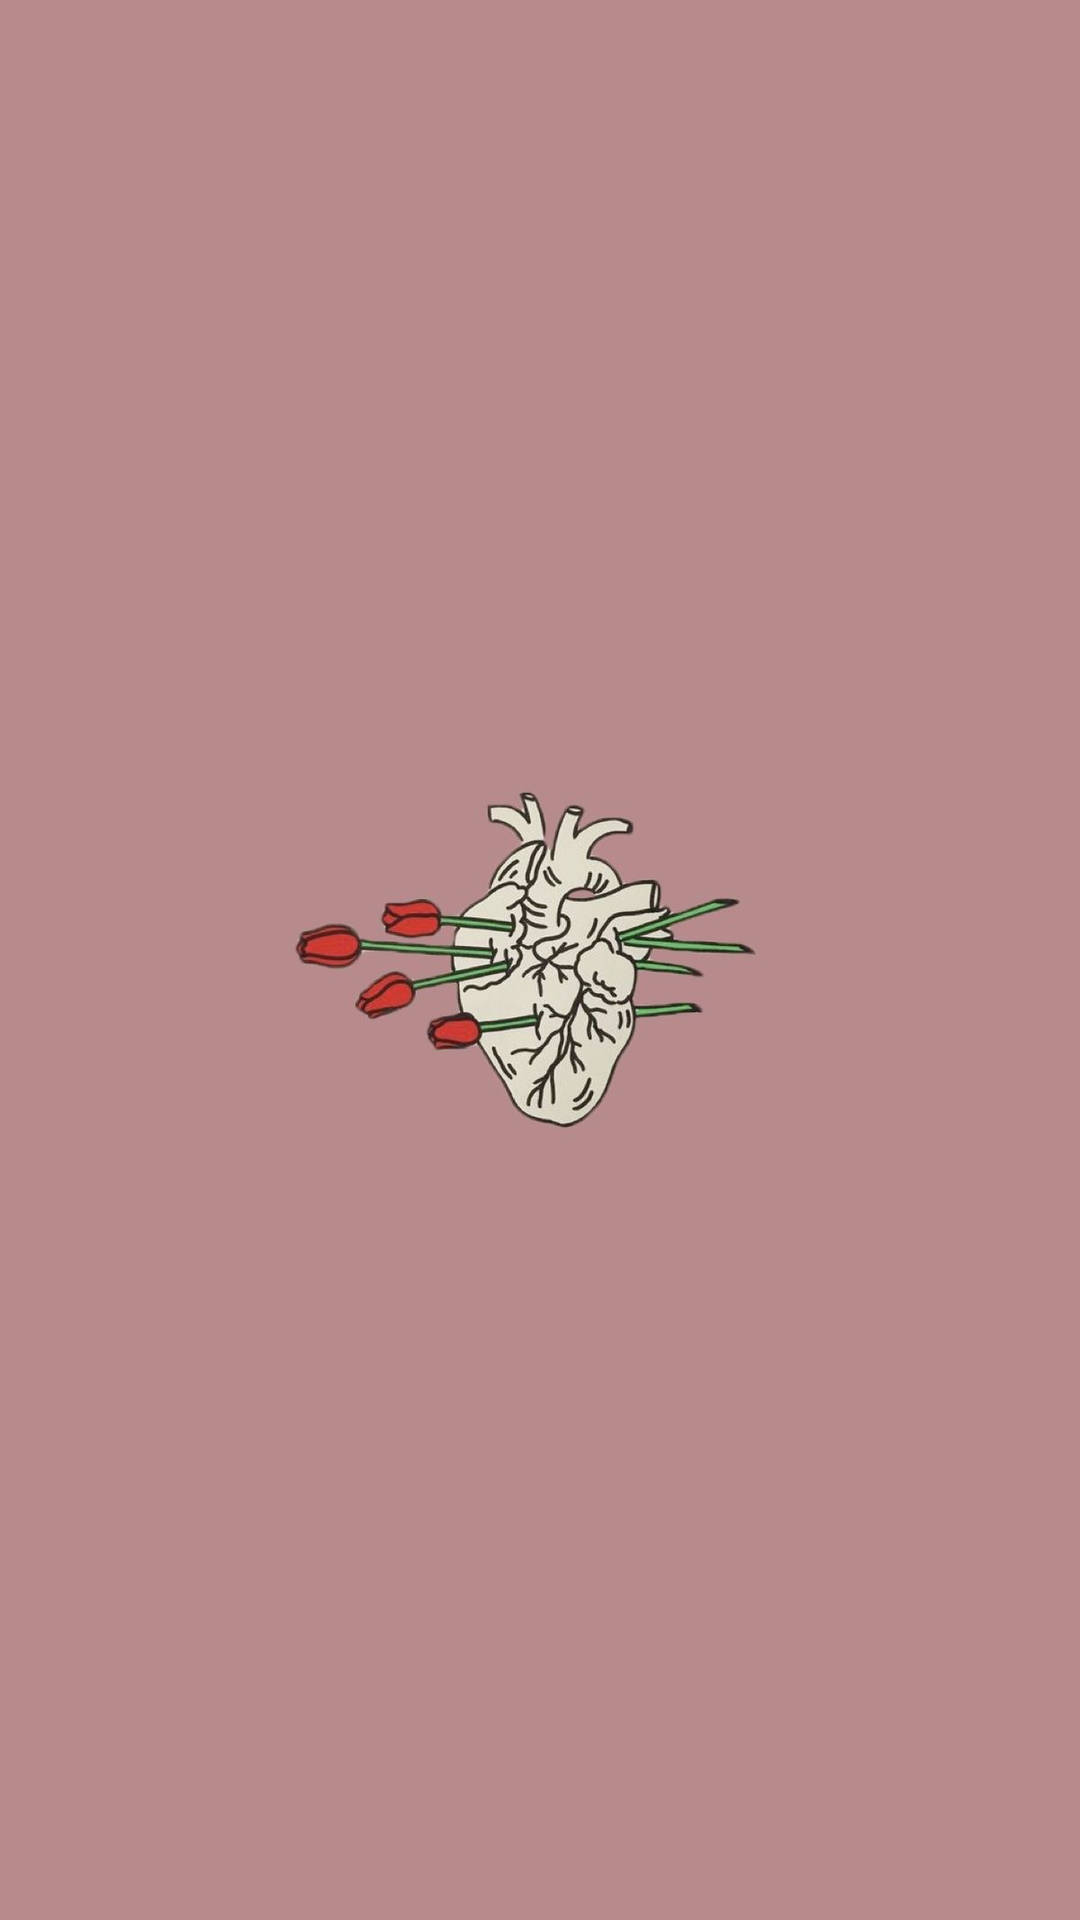 Aesthetic Heart With Red Roses